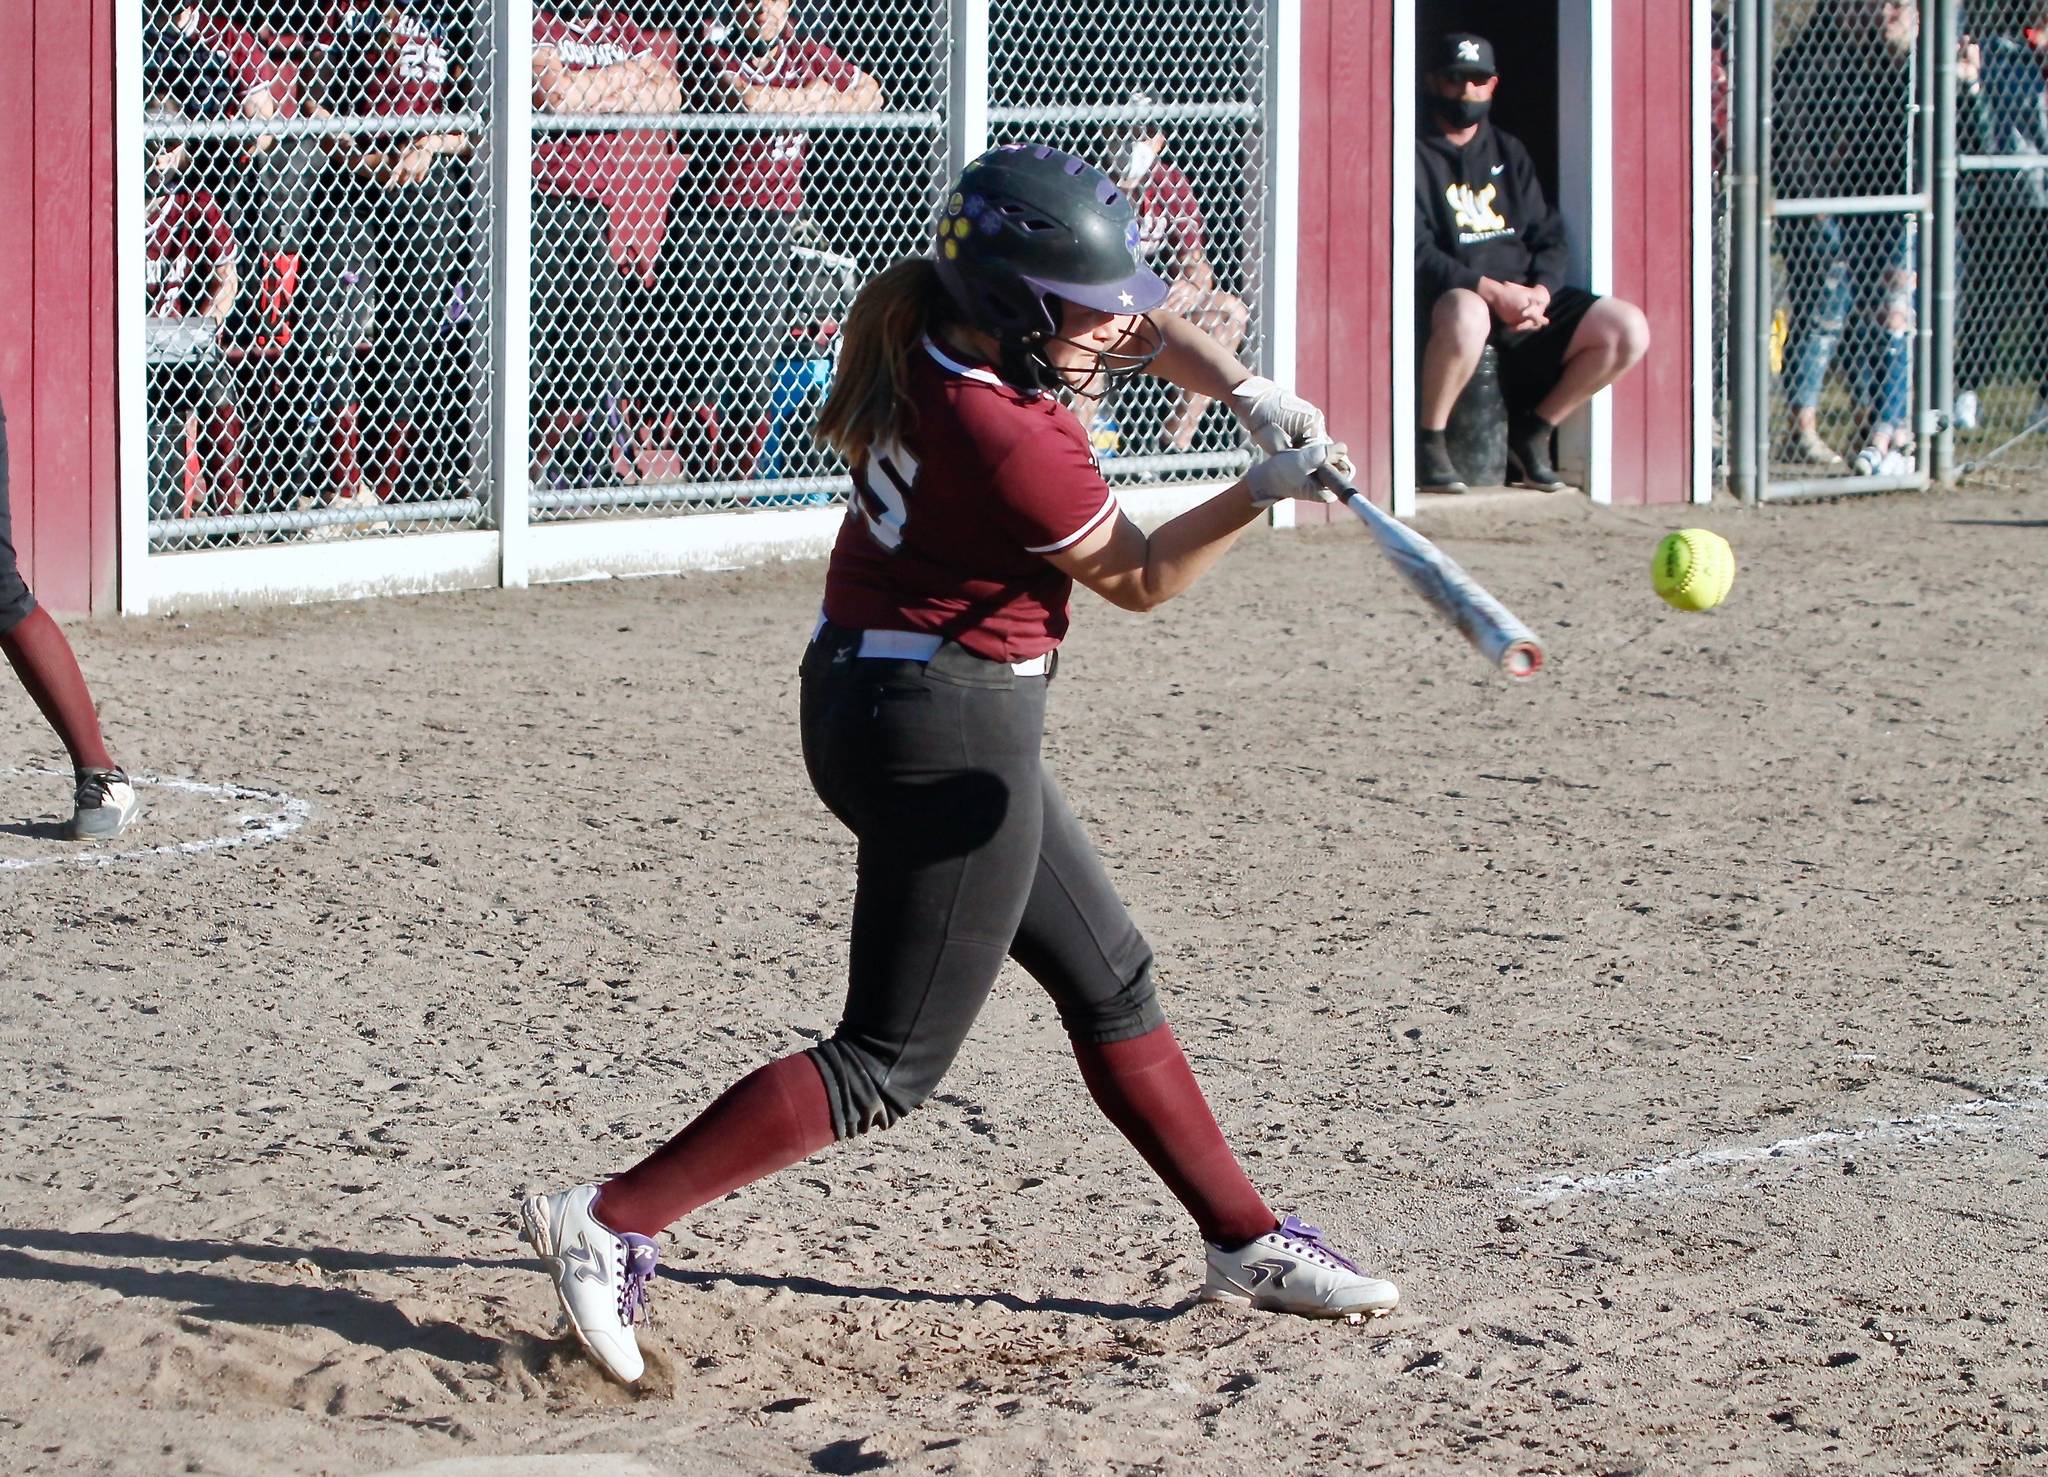 Sarah Hoyt delivers an RBI in the sixth inning of a 14-12 win over Gig Harbor. (Mark Krulish |Kitsap News Group)